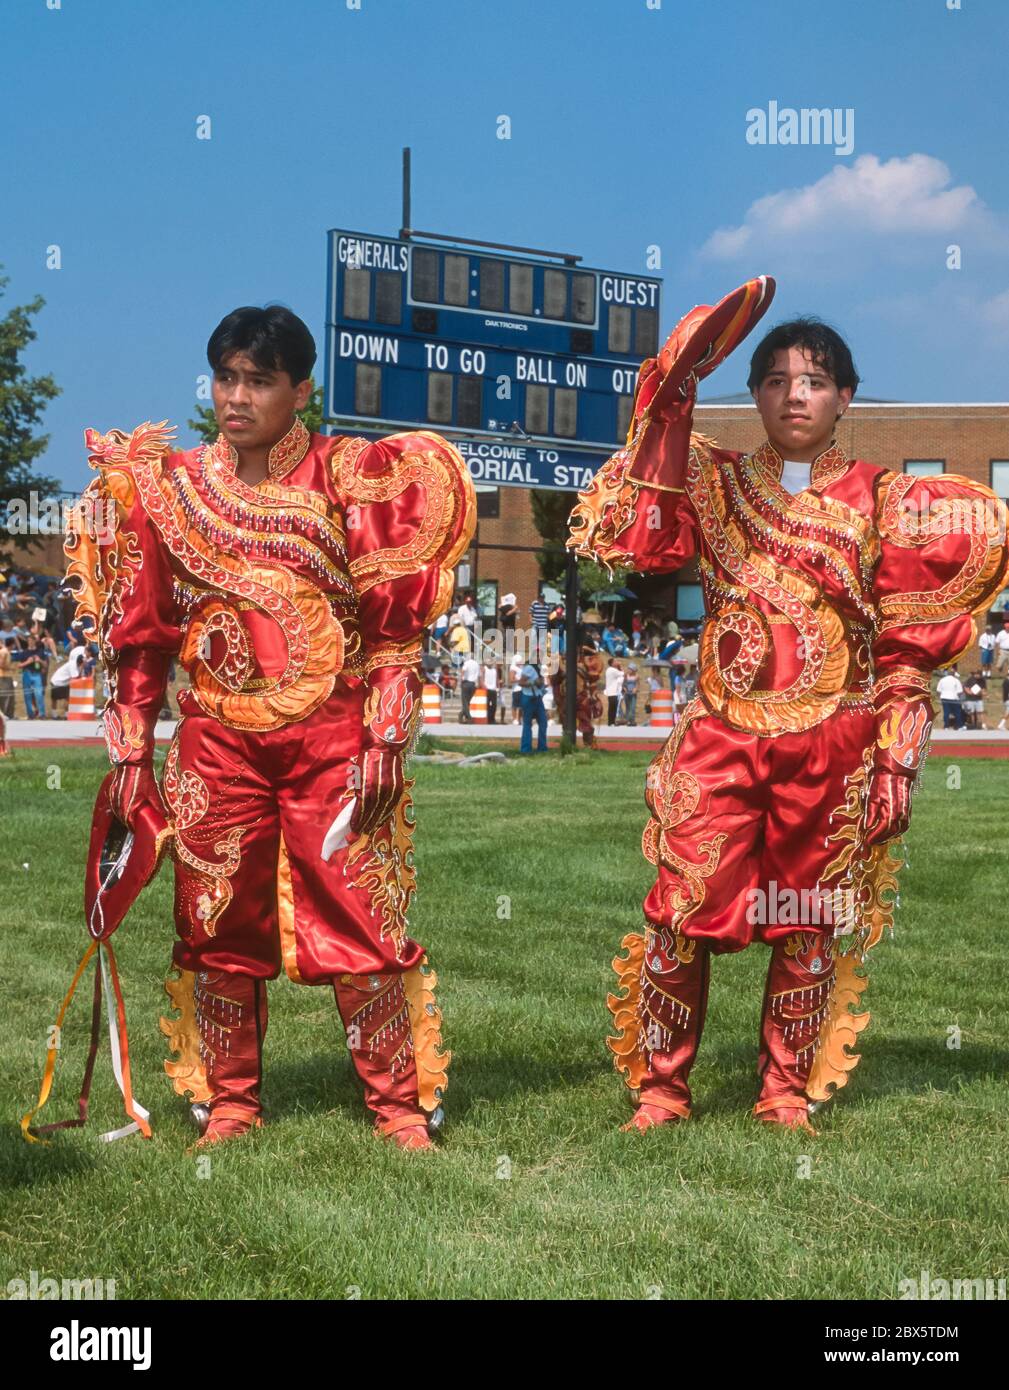 ARLINGTON, VIRGINIA, USA, AUGUST 2002 - Young Bolivian men in costume during Bolivian Folklore festival, in front of high school football scoreboard. Stock Photo